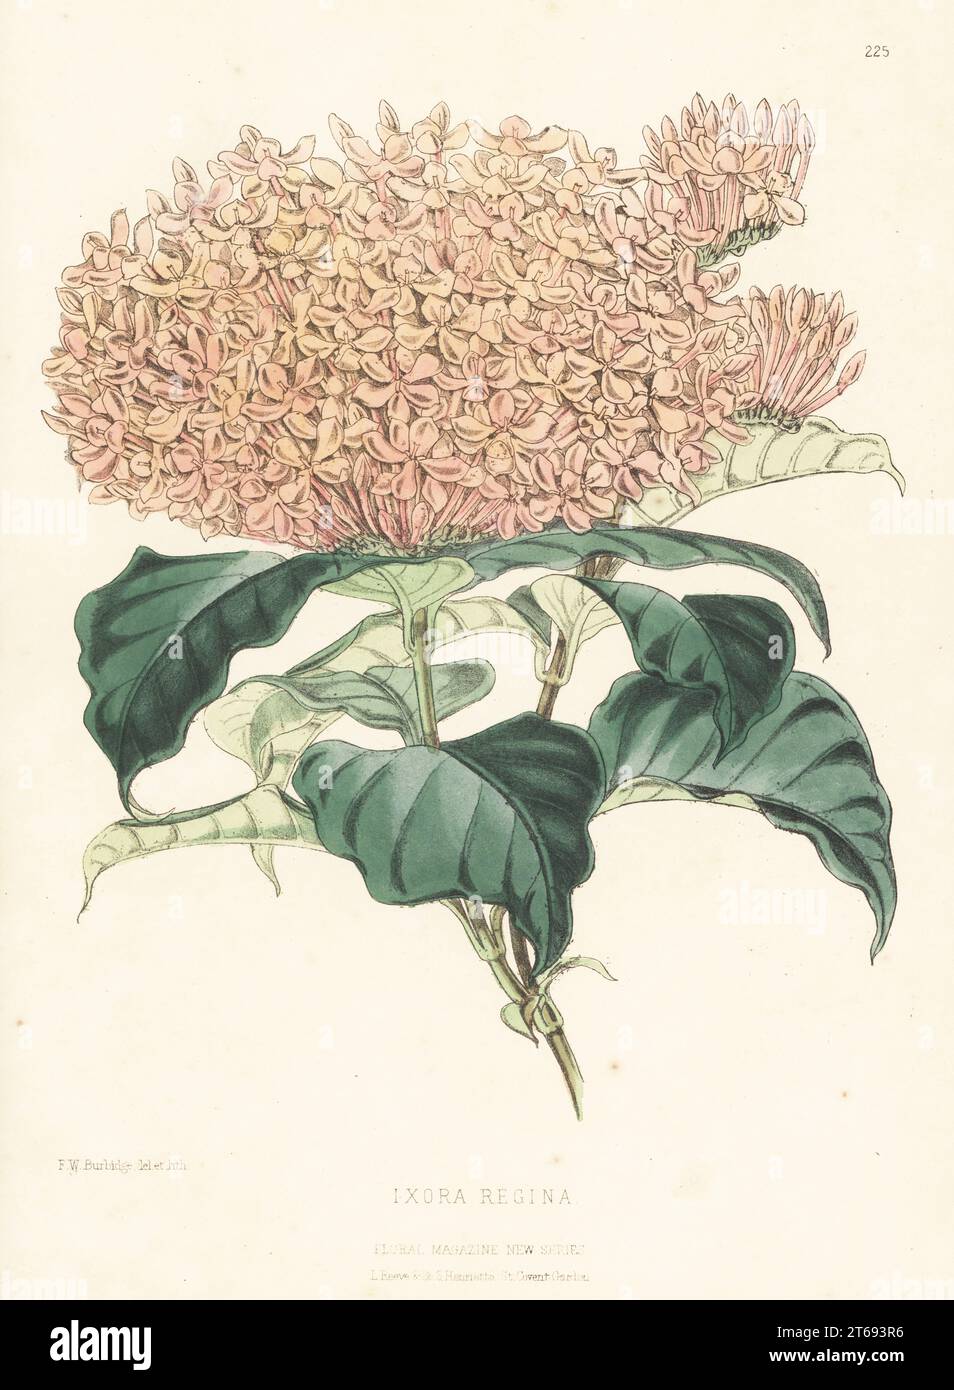 Dwarf variety with many flowers, Ixora species. Raised by William Bull, of King's Road, Chelsea. As Ixora regina. Handcolored botanical illustration drawn and lithographed by Frederick William Burbidge from Henry Honywood Dombrain's Floral Magazine, New Series, Volume 5, L. Reeve, London, 1876. Lithograph printed by Vincent Brooks, Day & Son. Stock Photo